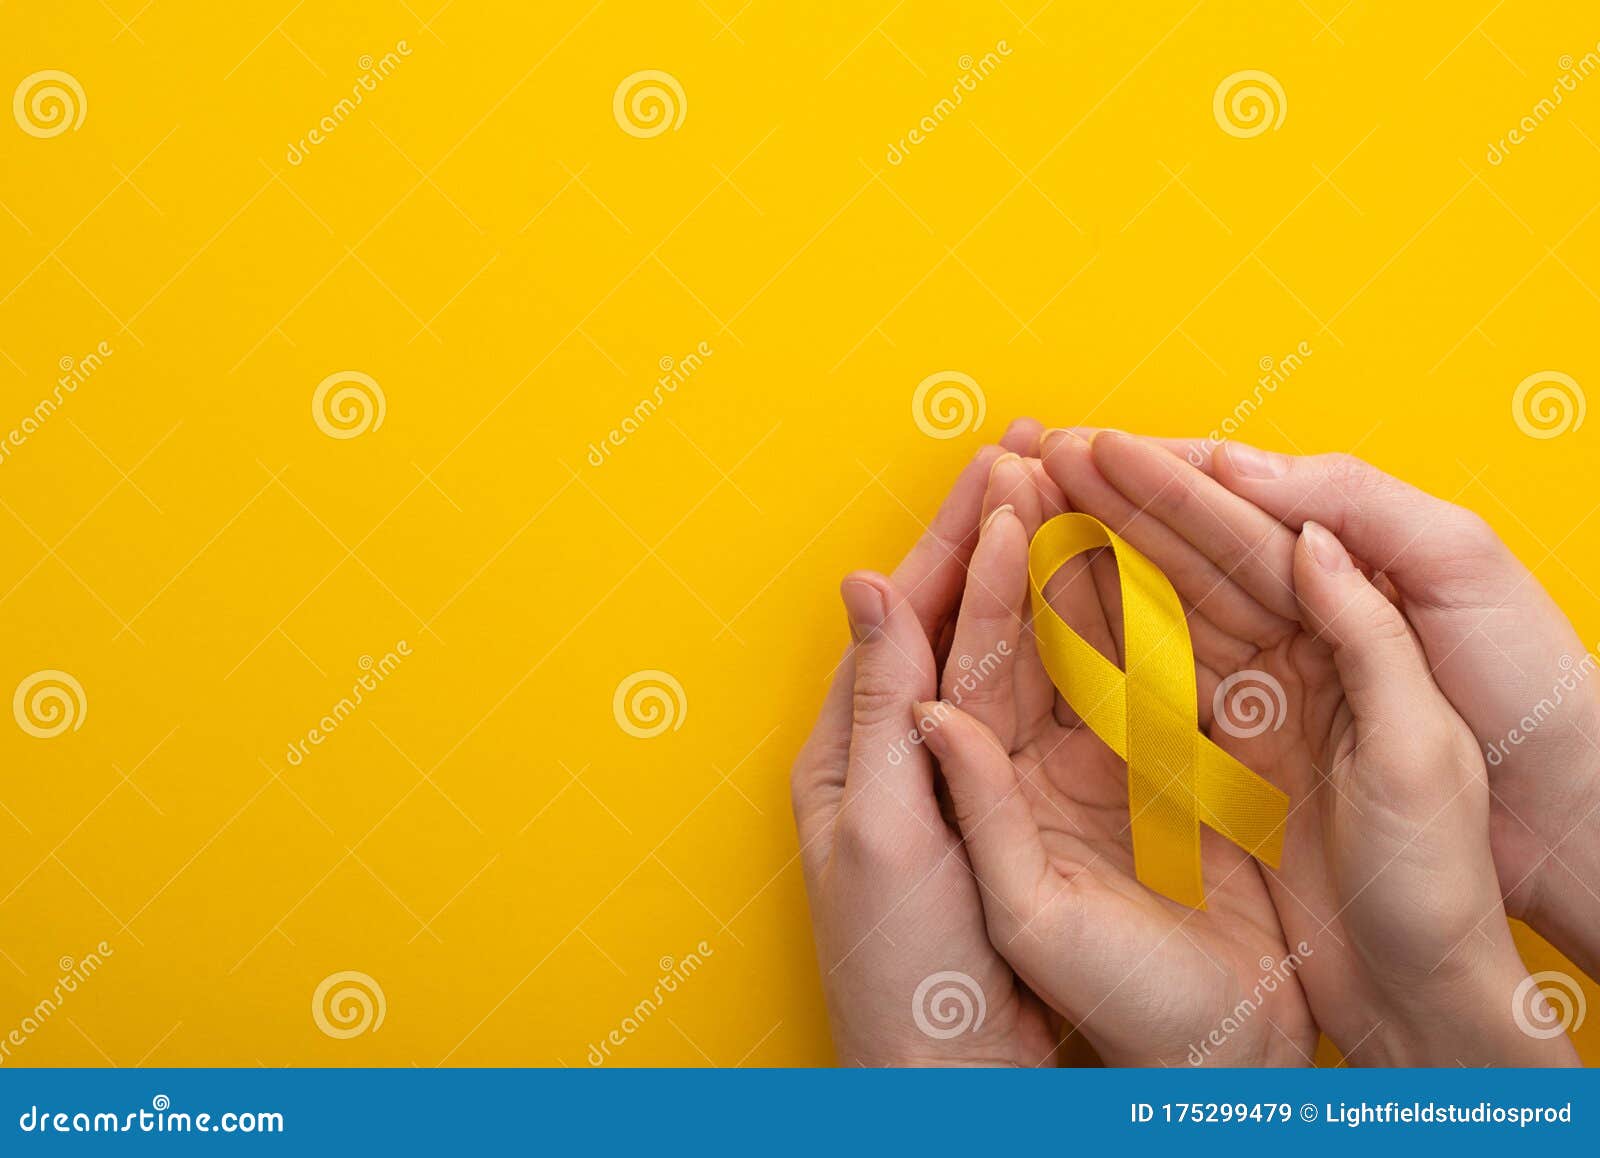 cropped view of woman and man holding yellow ribbon on colorful background, international childhood cancer day concept.